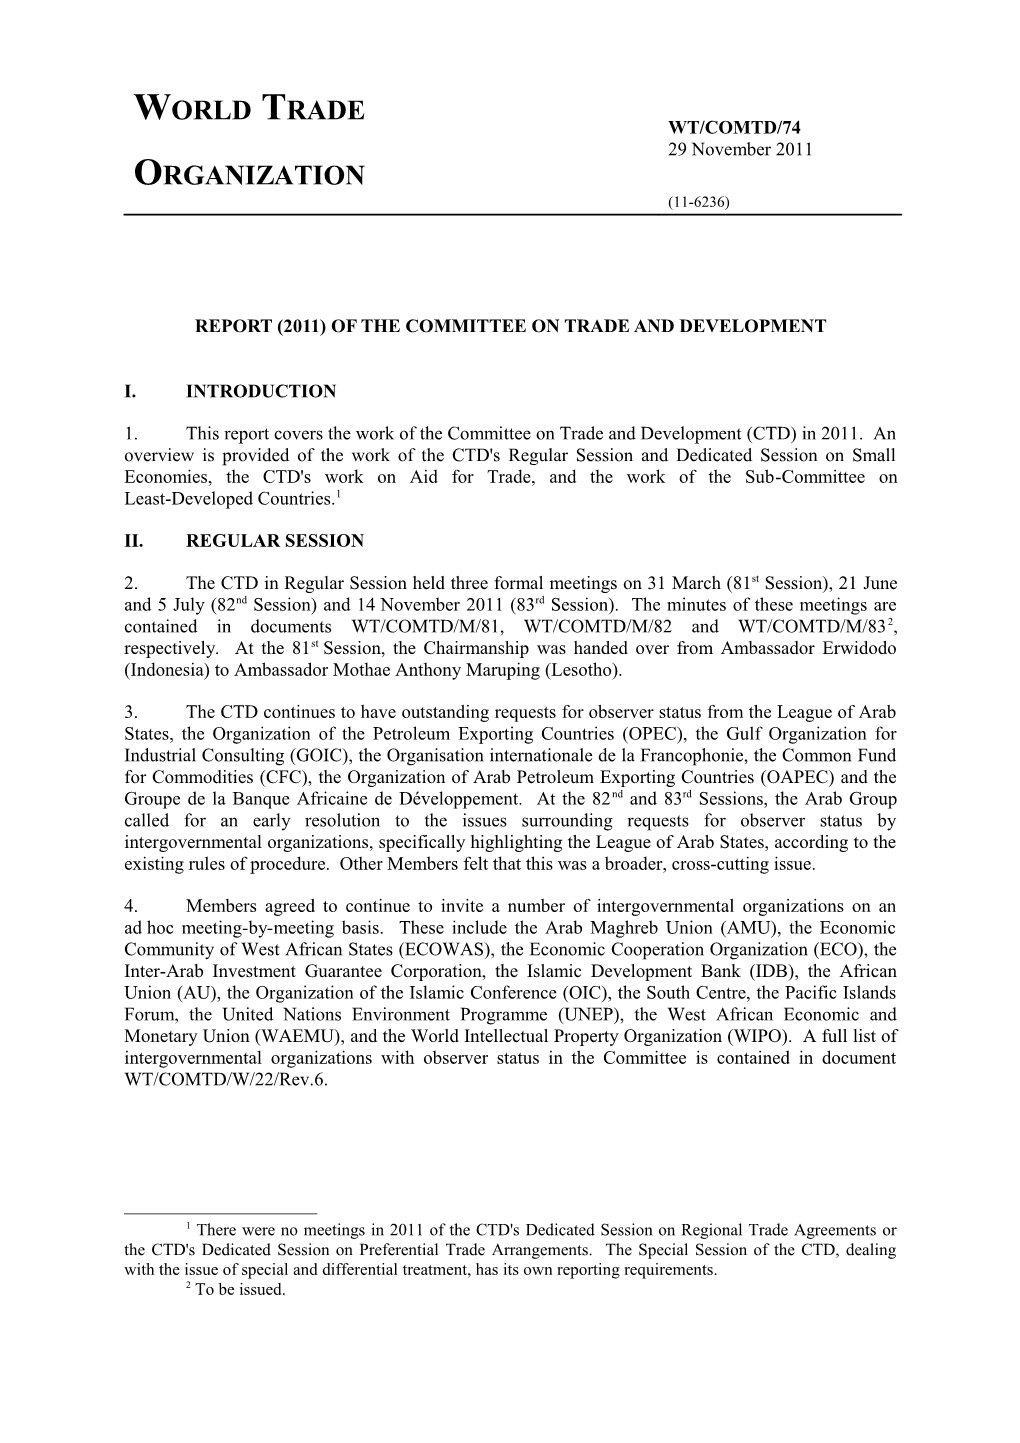 Report (2011) of the Committee on Trade and Development